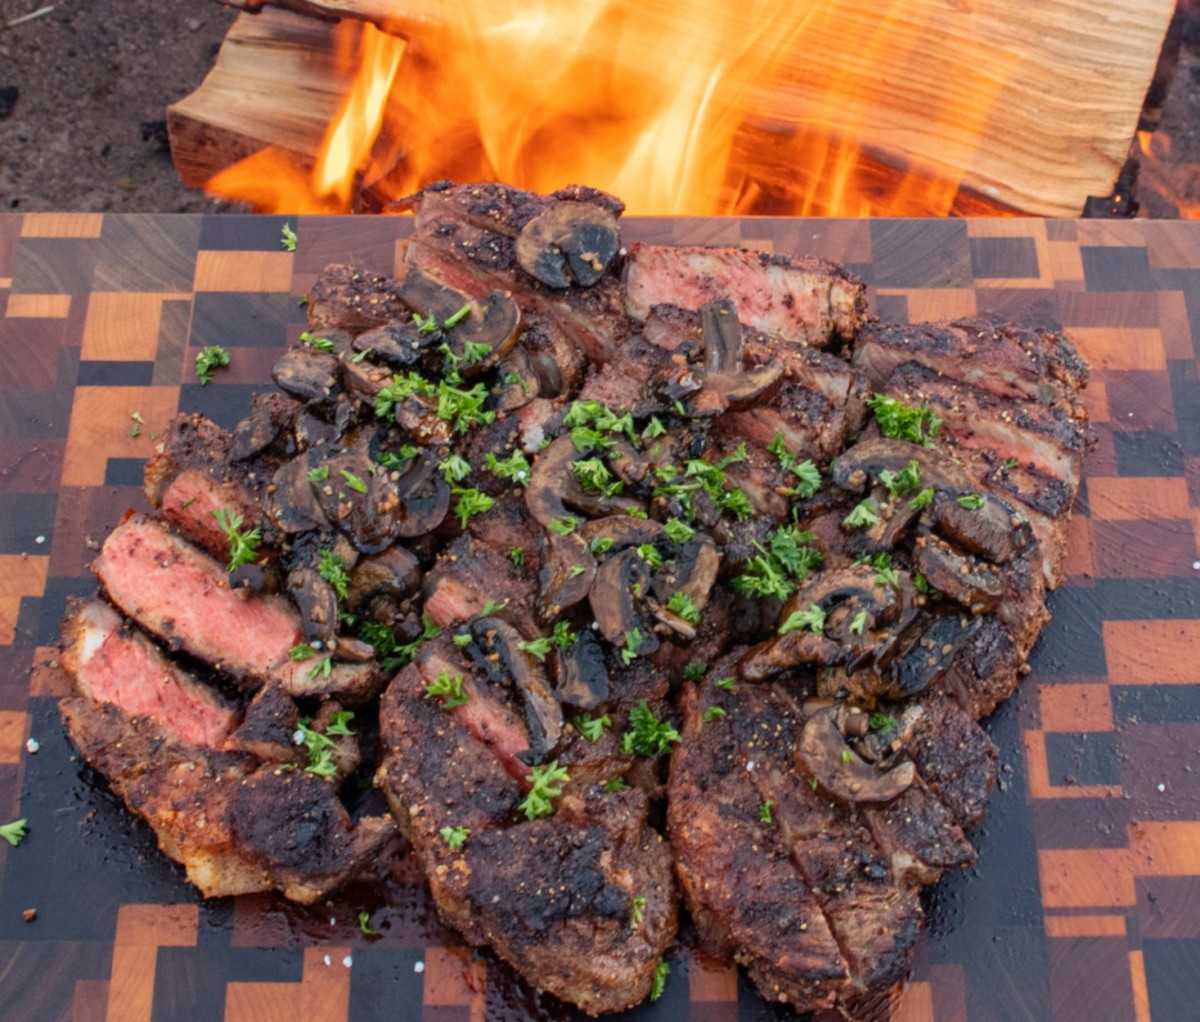 New York Strip Steaks cut up on a wooden cutting board campfire cooking